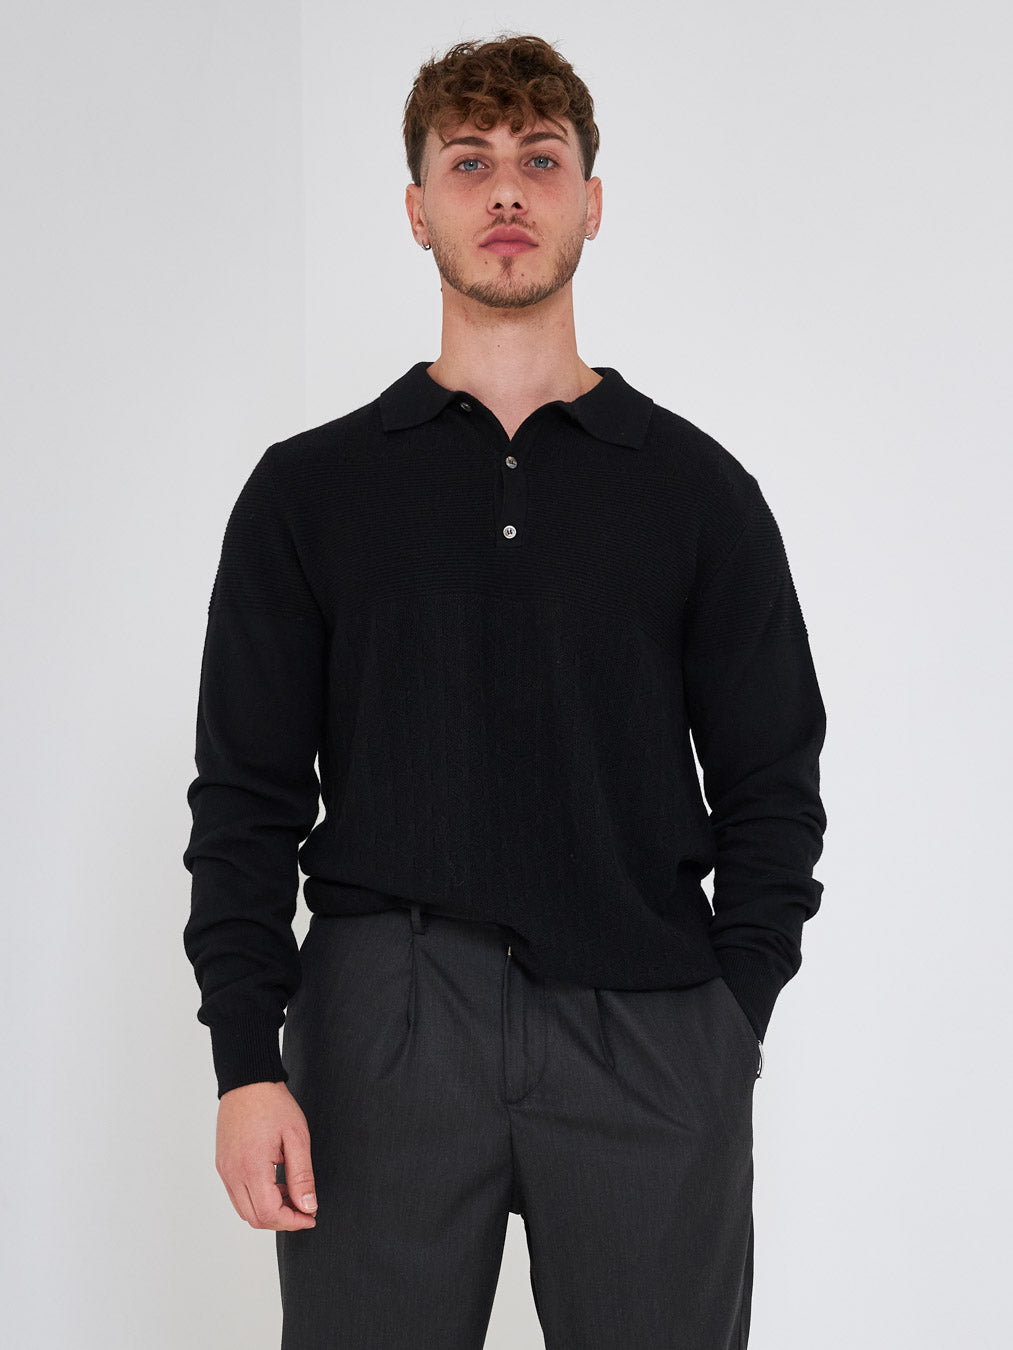 Prime black sweater with polo collar